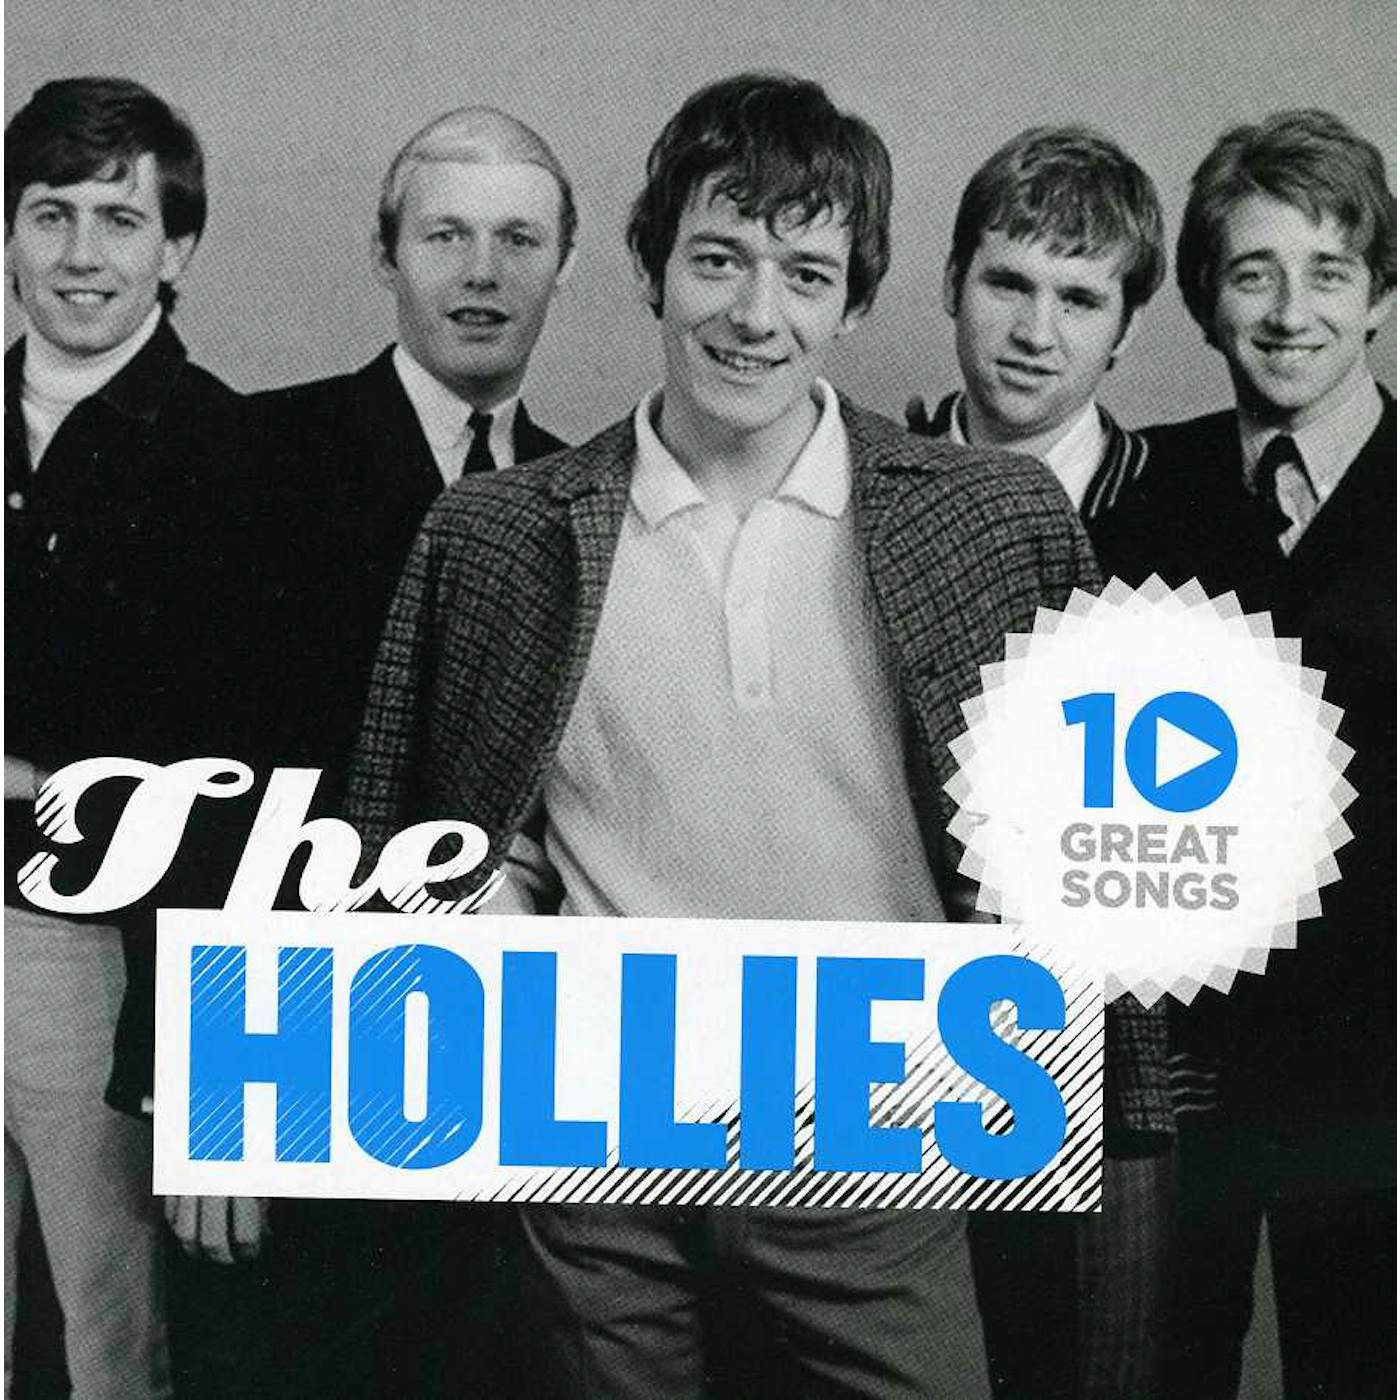 The Hollies 10 GREAT SONGS CD